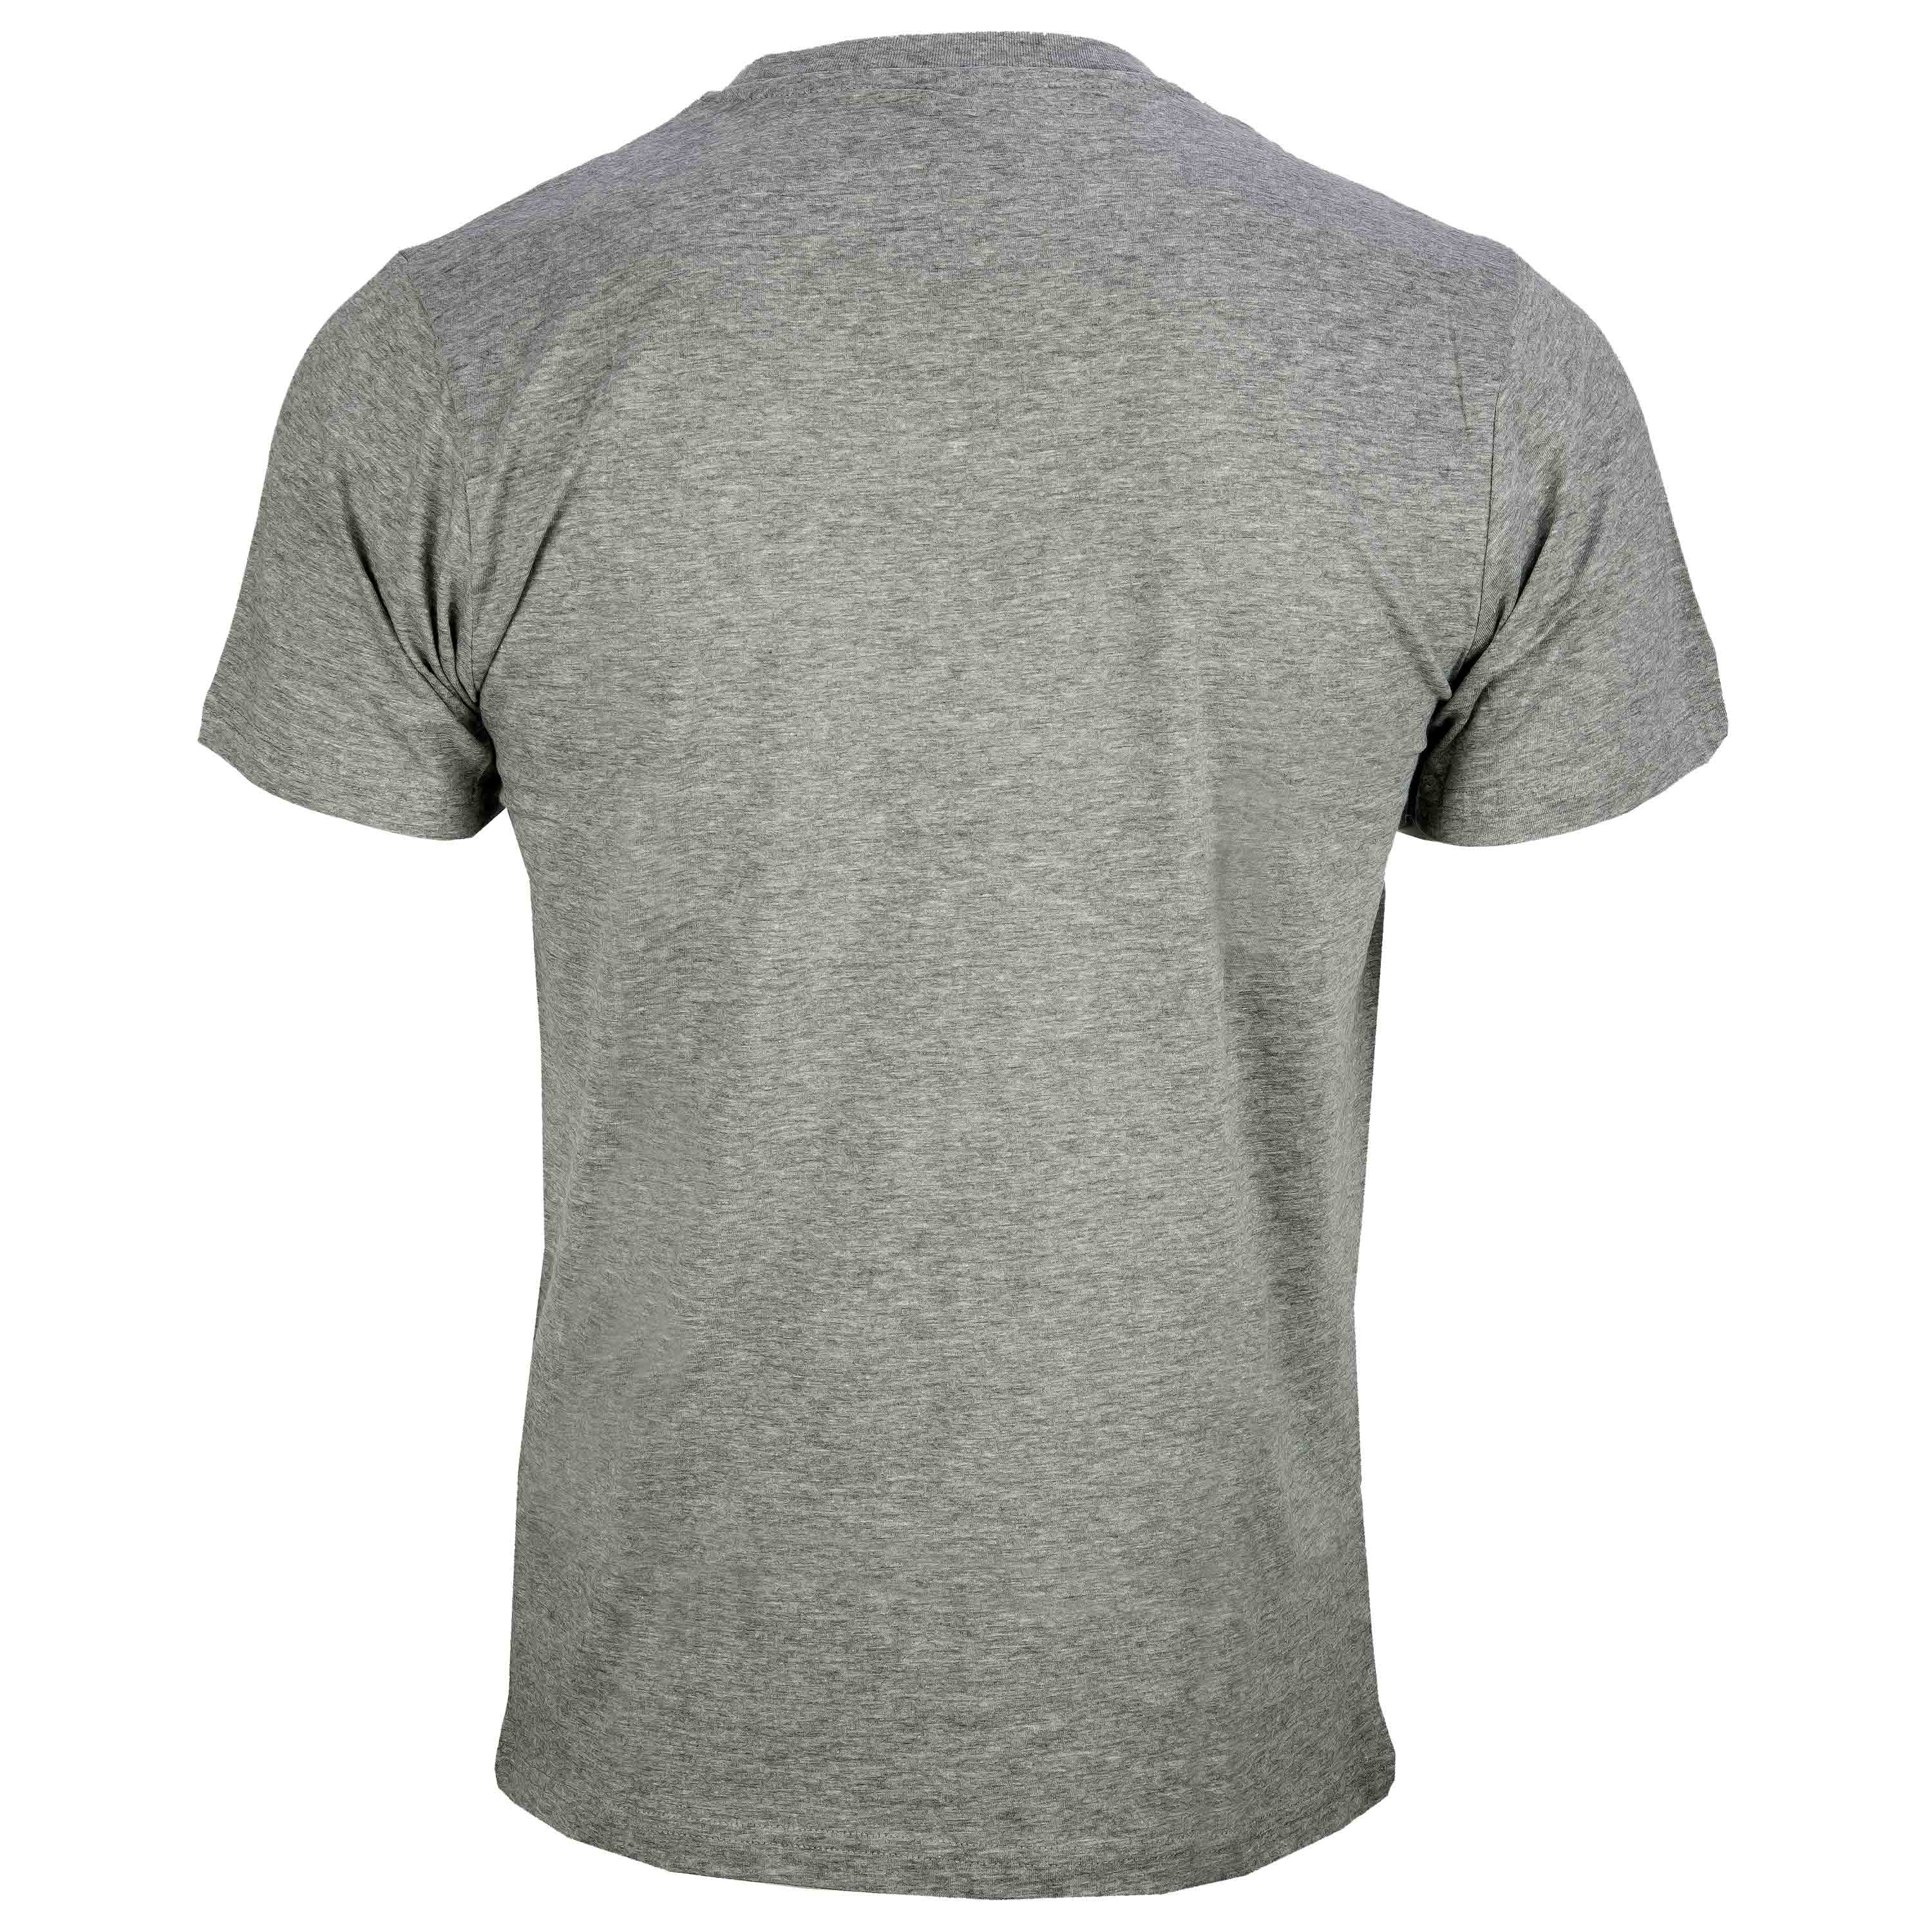 Purchase the T-Shirt ARMY gray by ASMC